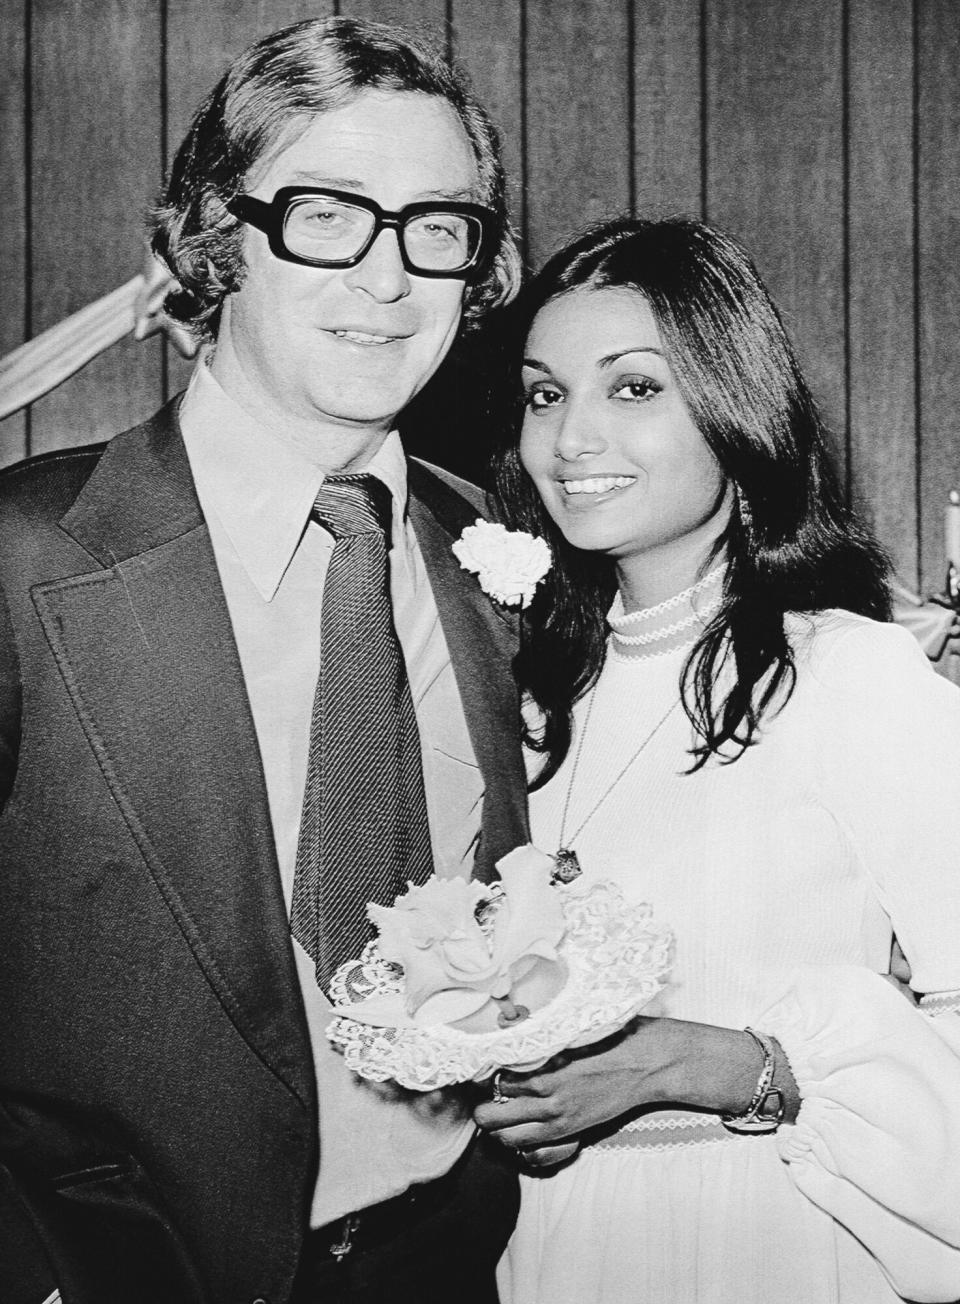 Michael Caine, 39, married Shakira Baksh, 25, in a civil ceremony in Las Vegas, 1/8. Miss Baksh, the former "Miss Guiana," had dated the actor for 18 months.